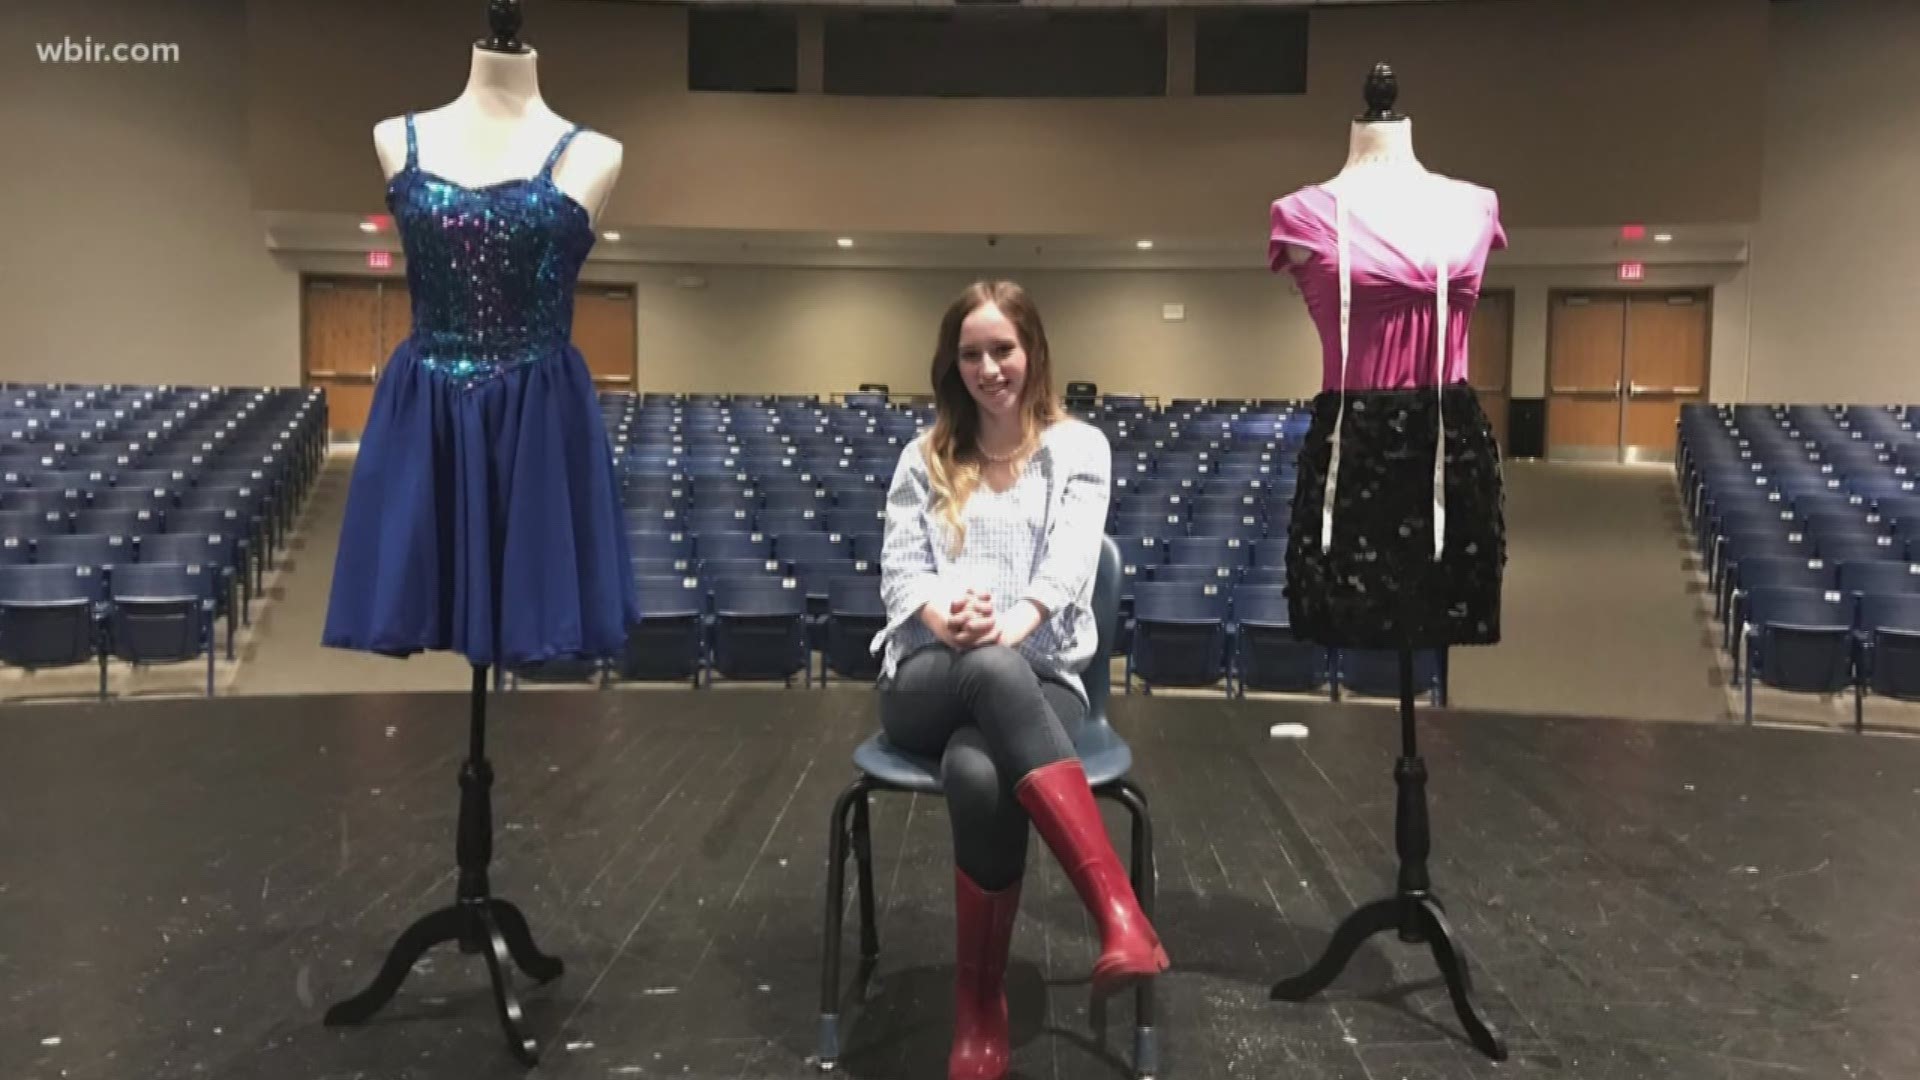 A senior at Hardin Valley Academy is going to be wearing a unique dress to prom.